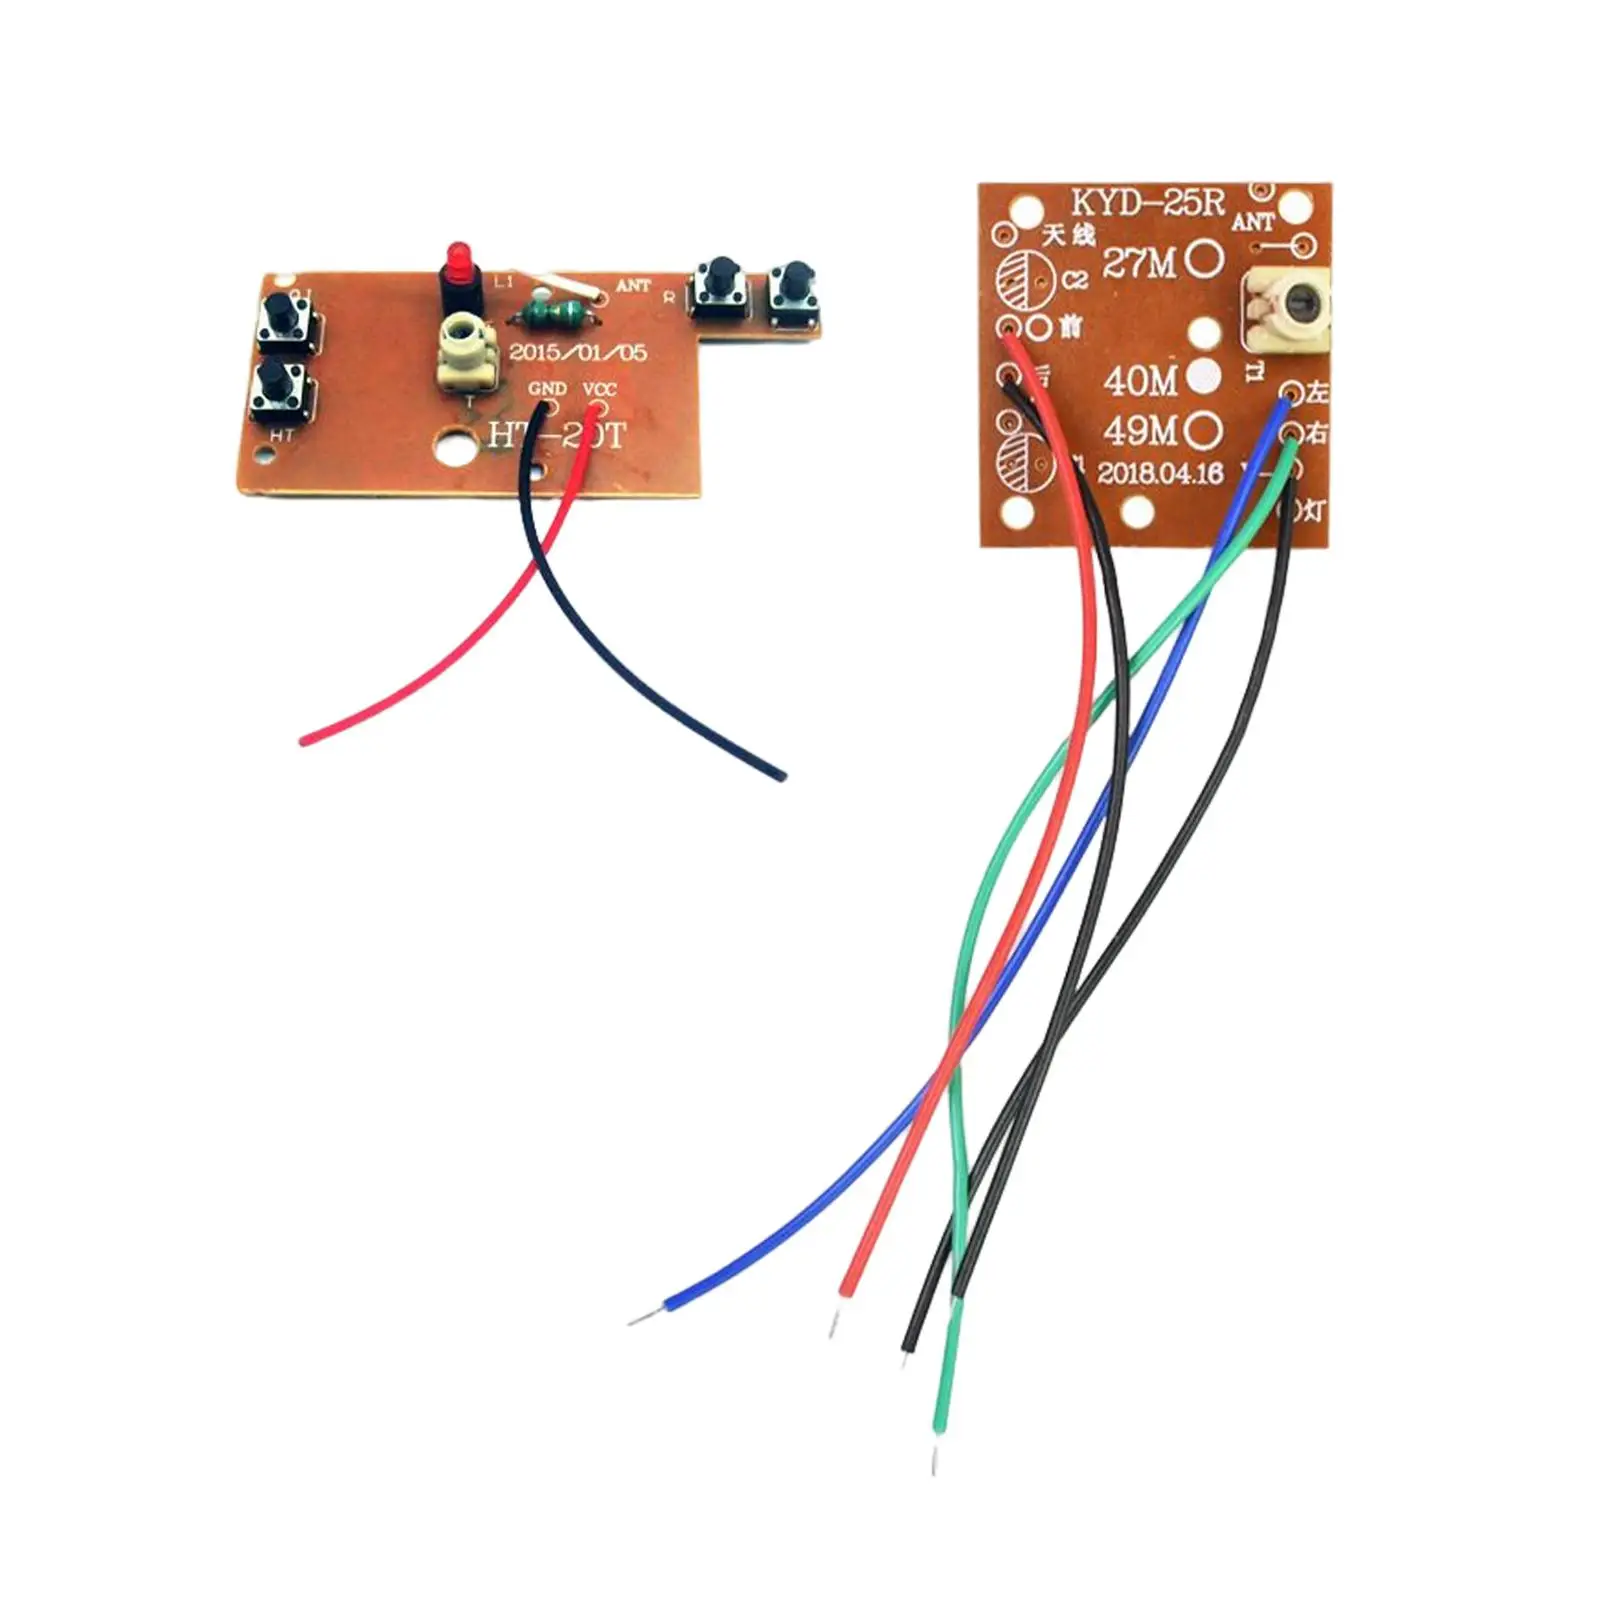 Trnsmitter Bord nd Receiver Bord Circuit Bord ccessories for RC Toy RC Replcement Prt 27MHz for RC Cr Prts Replcement